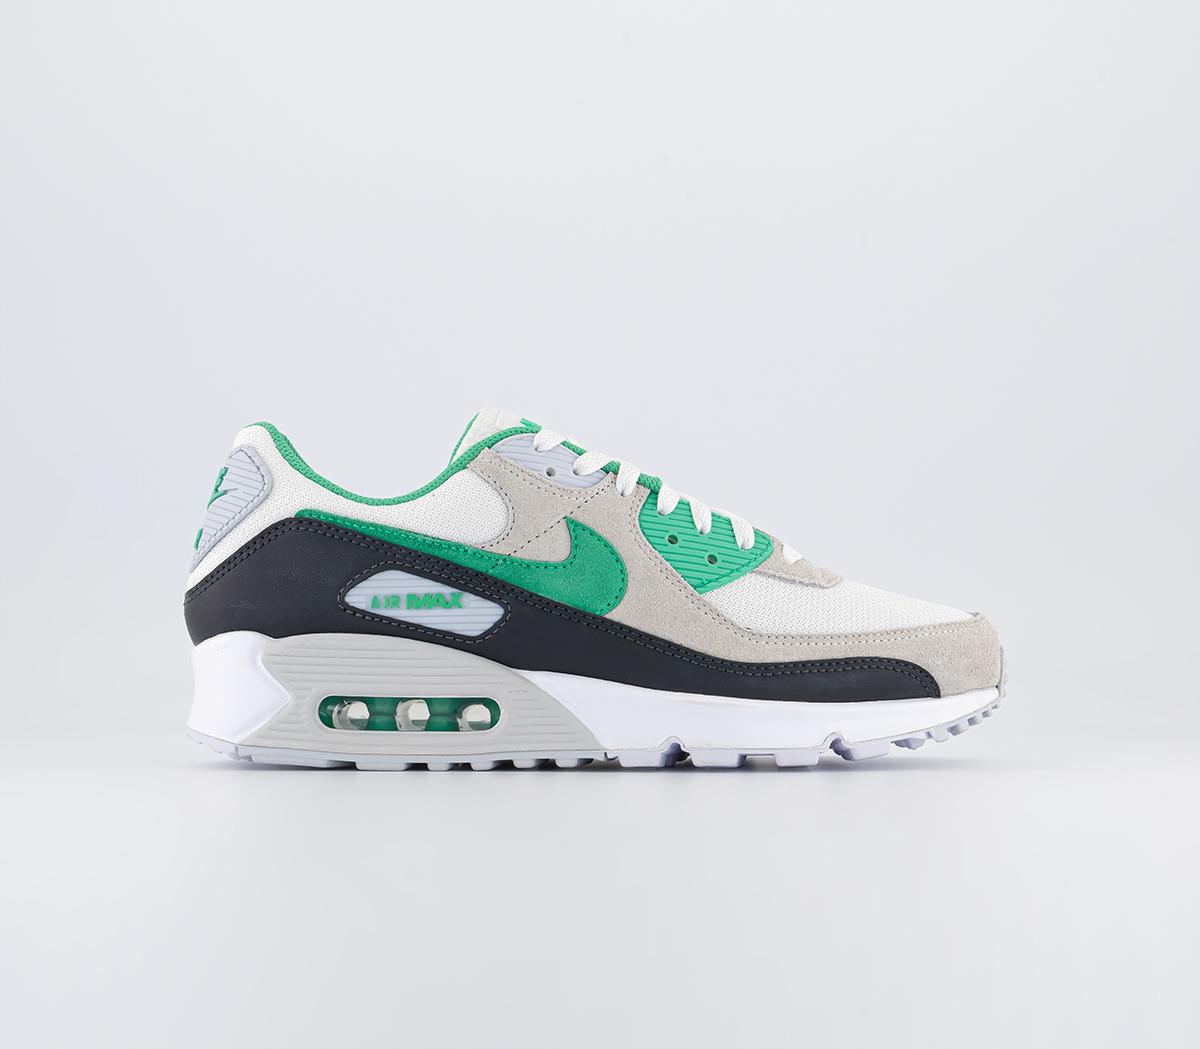 Nike Air Max 90 Trainers White Spring Green Anthracite - Men's Trainers